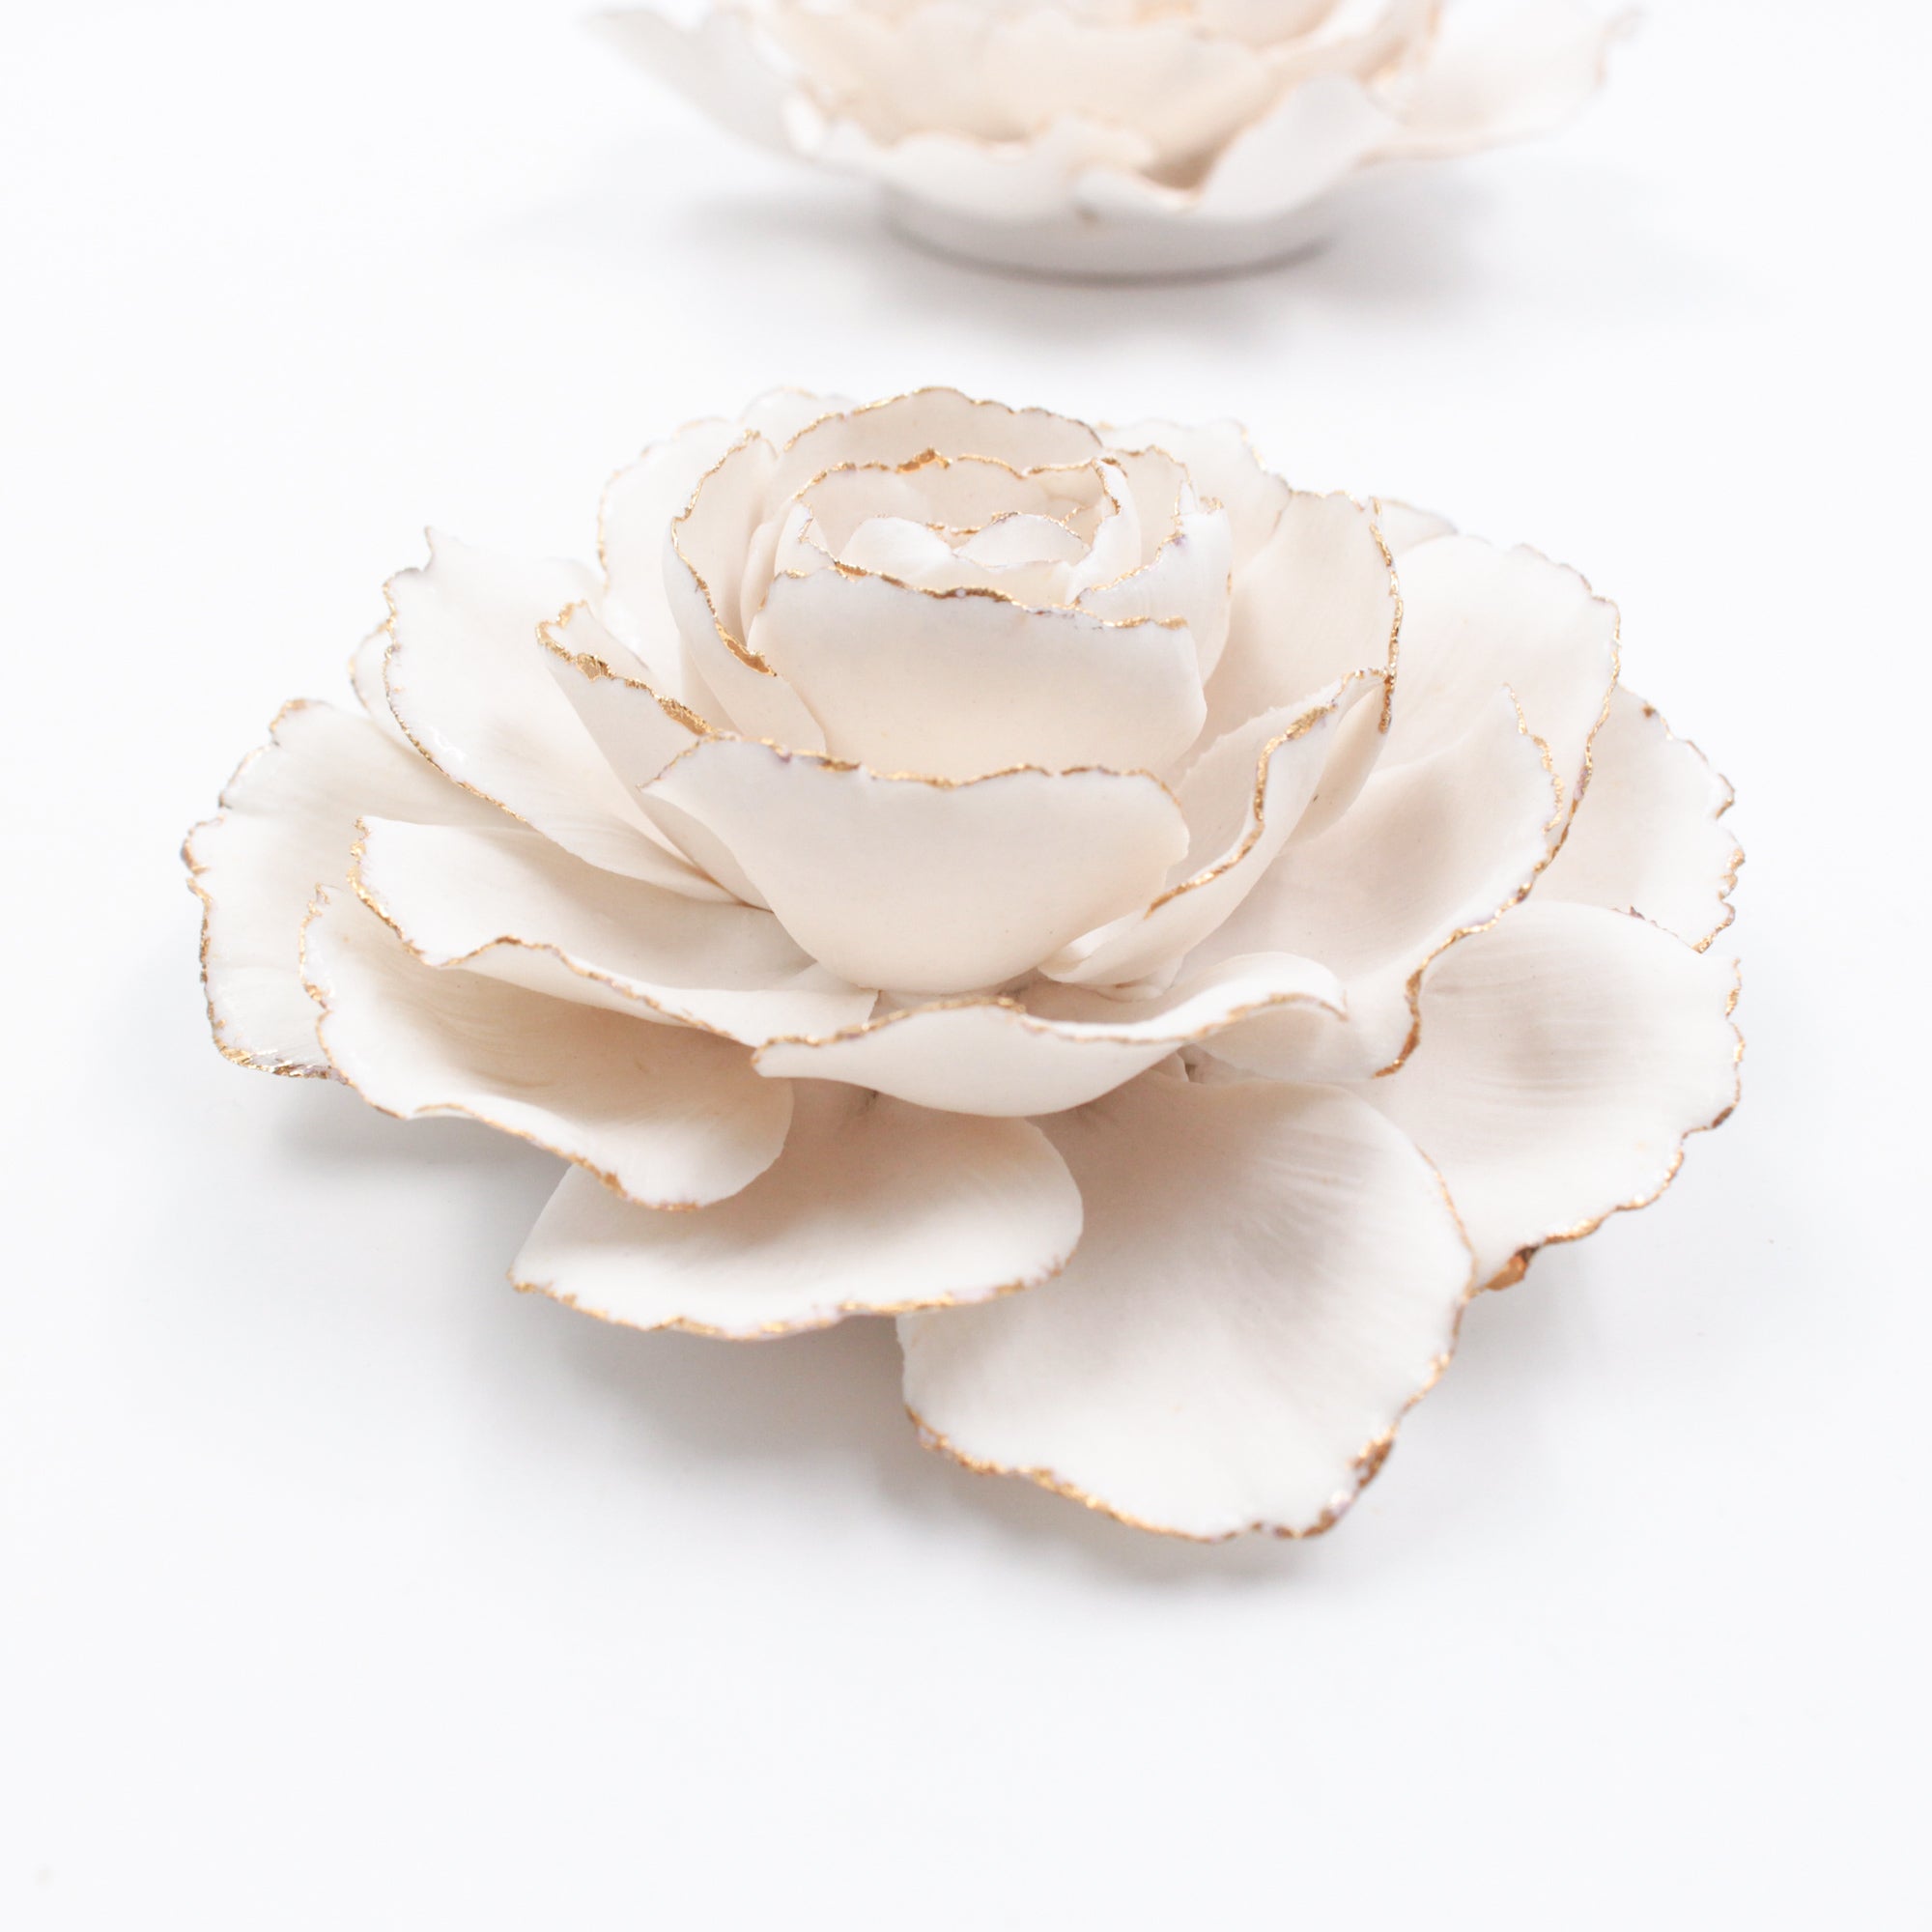 Golden Porcelain Peony- Handmade Porcelain Flower for Interior and Event Decoration - Made in France by Alain Granell – Home and Wall Decoration